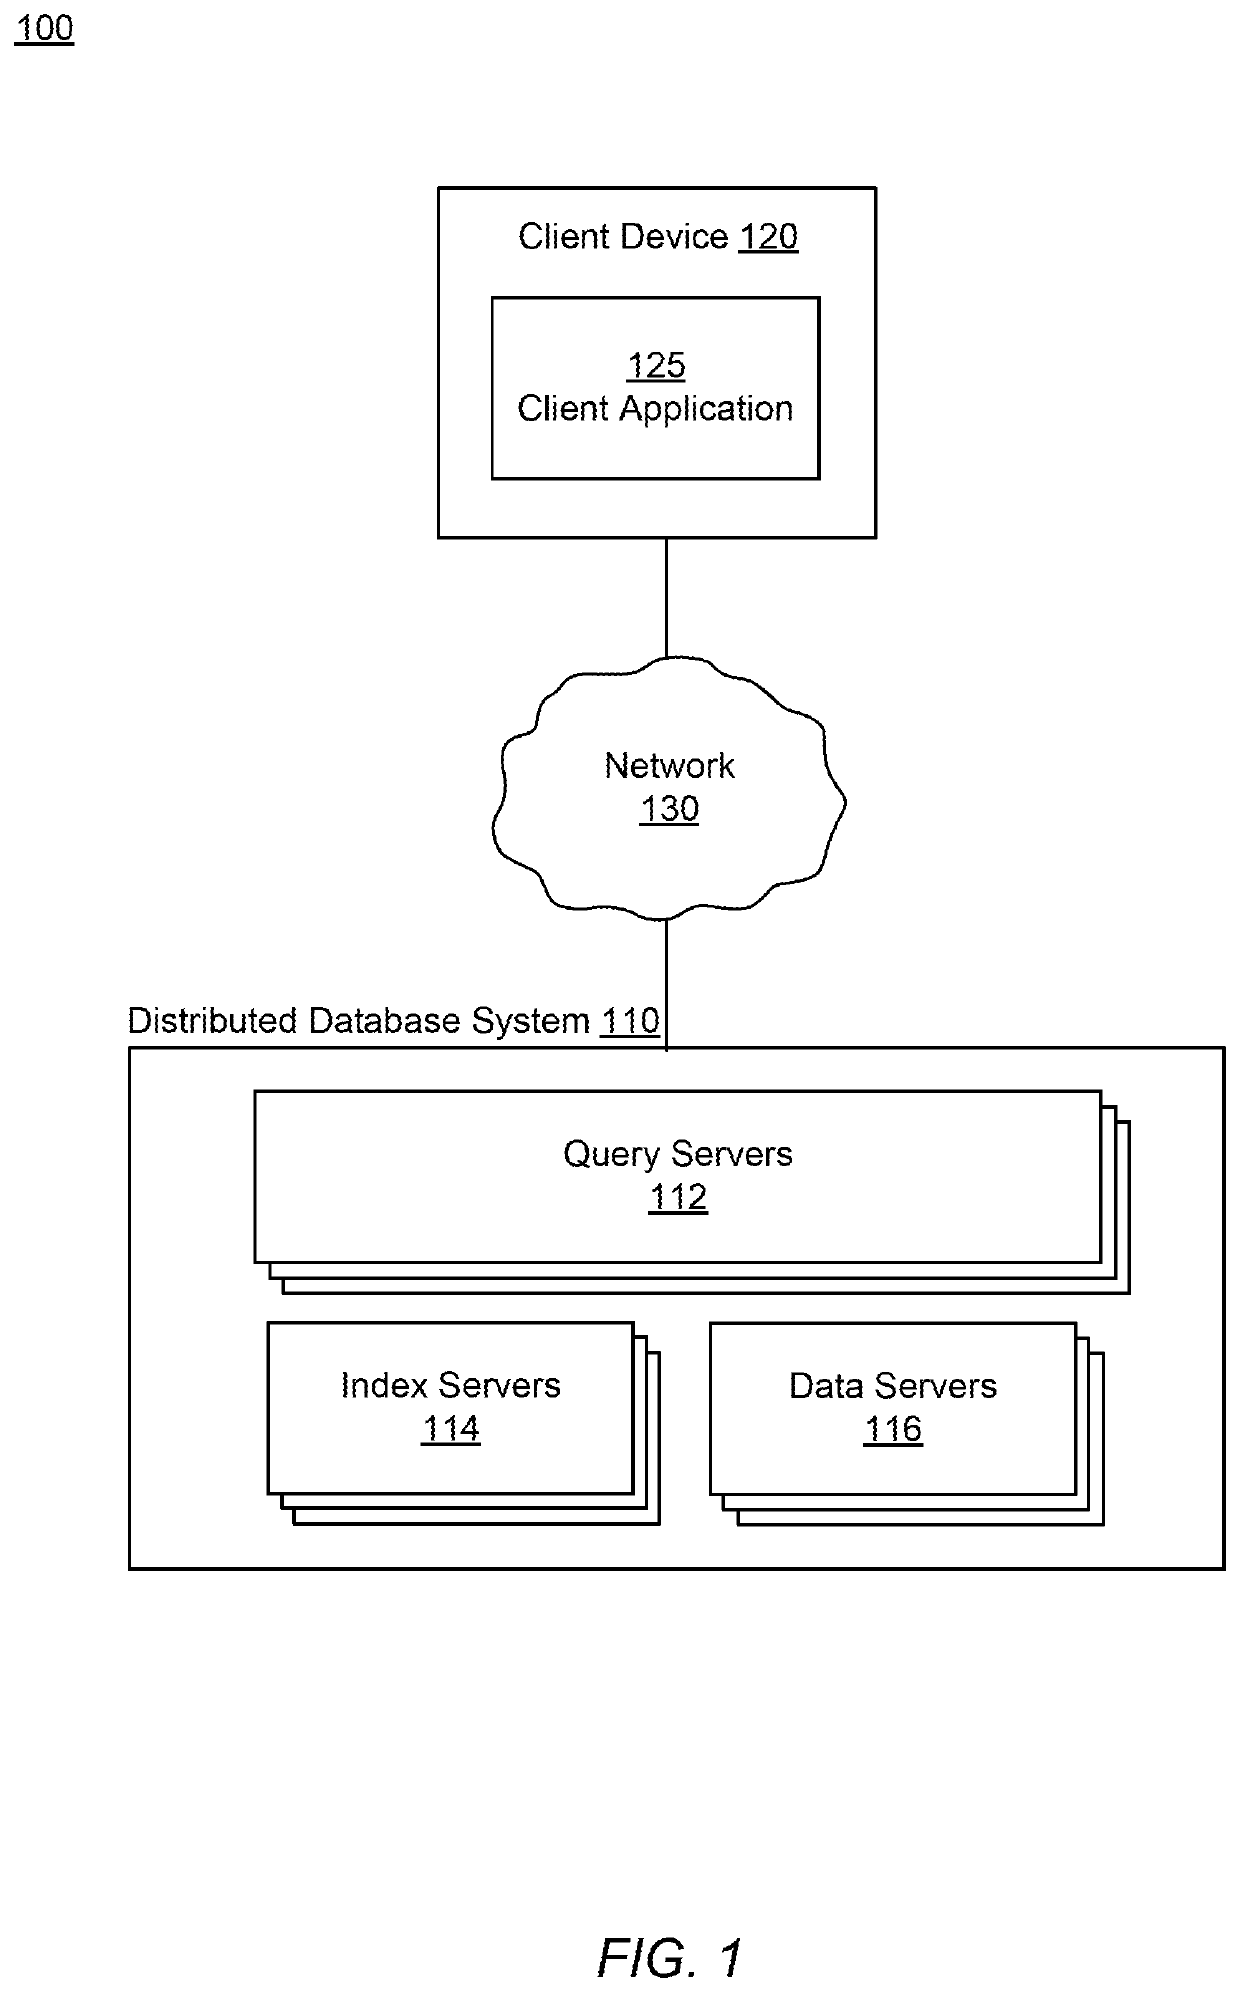 Executing transactions on distributed databases